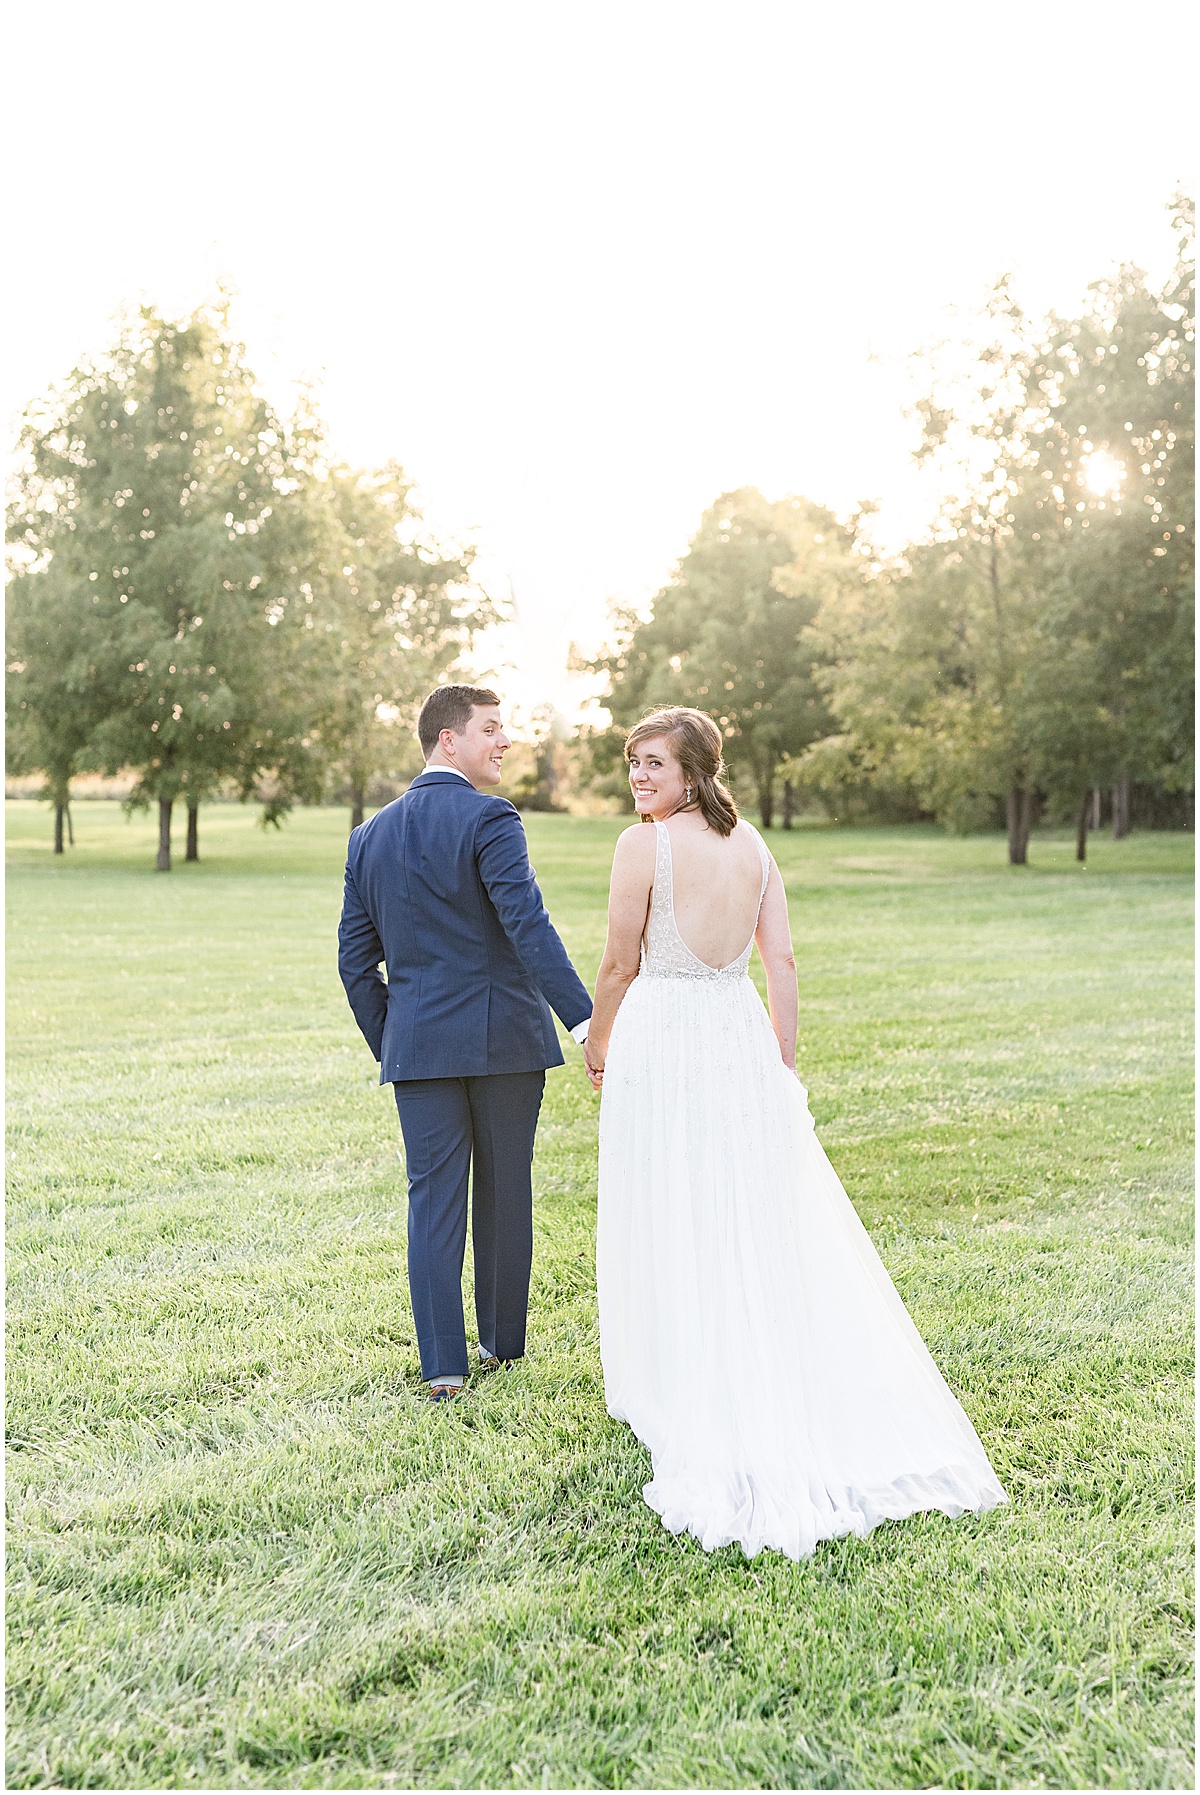 Just married photos after wedding at The Sixpence in Whitestown, Indiana by Indianapolis wedding photographer Victoria Rayburn